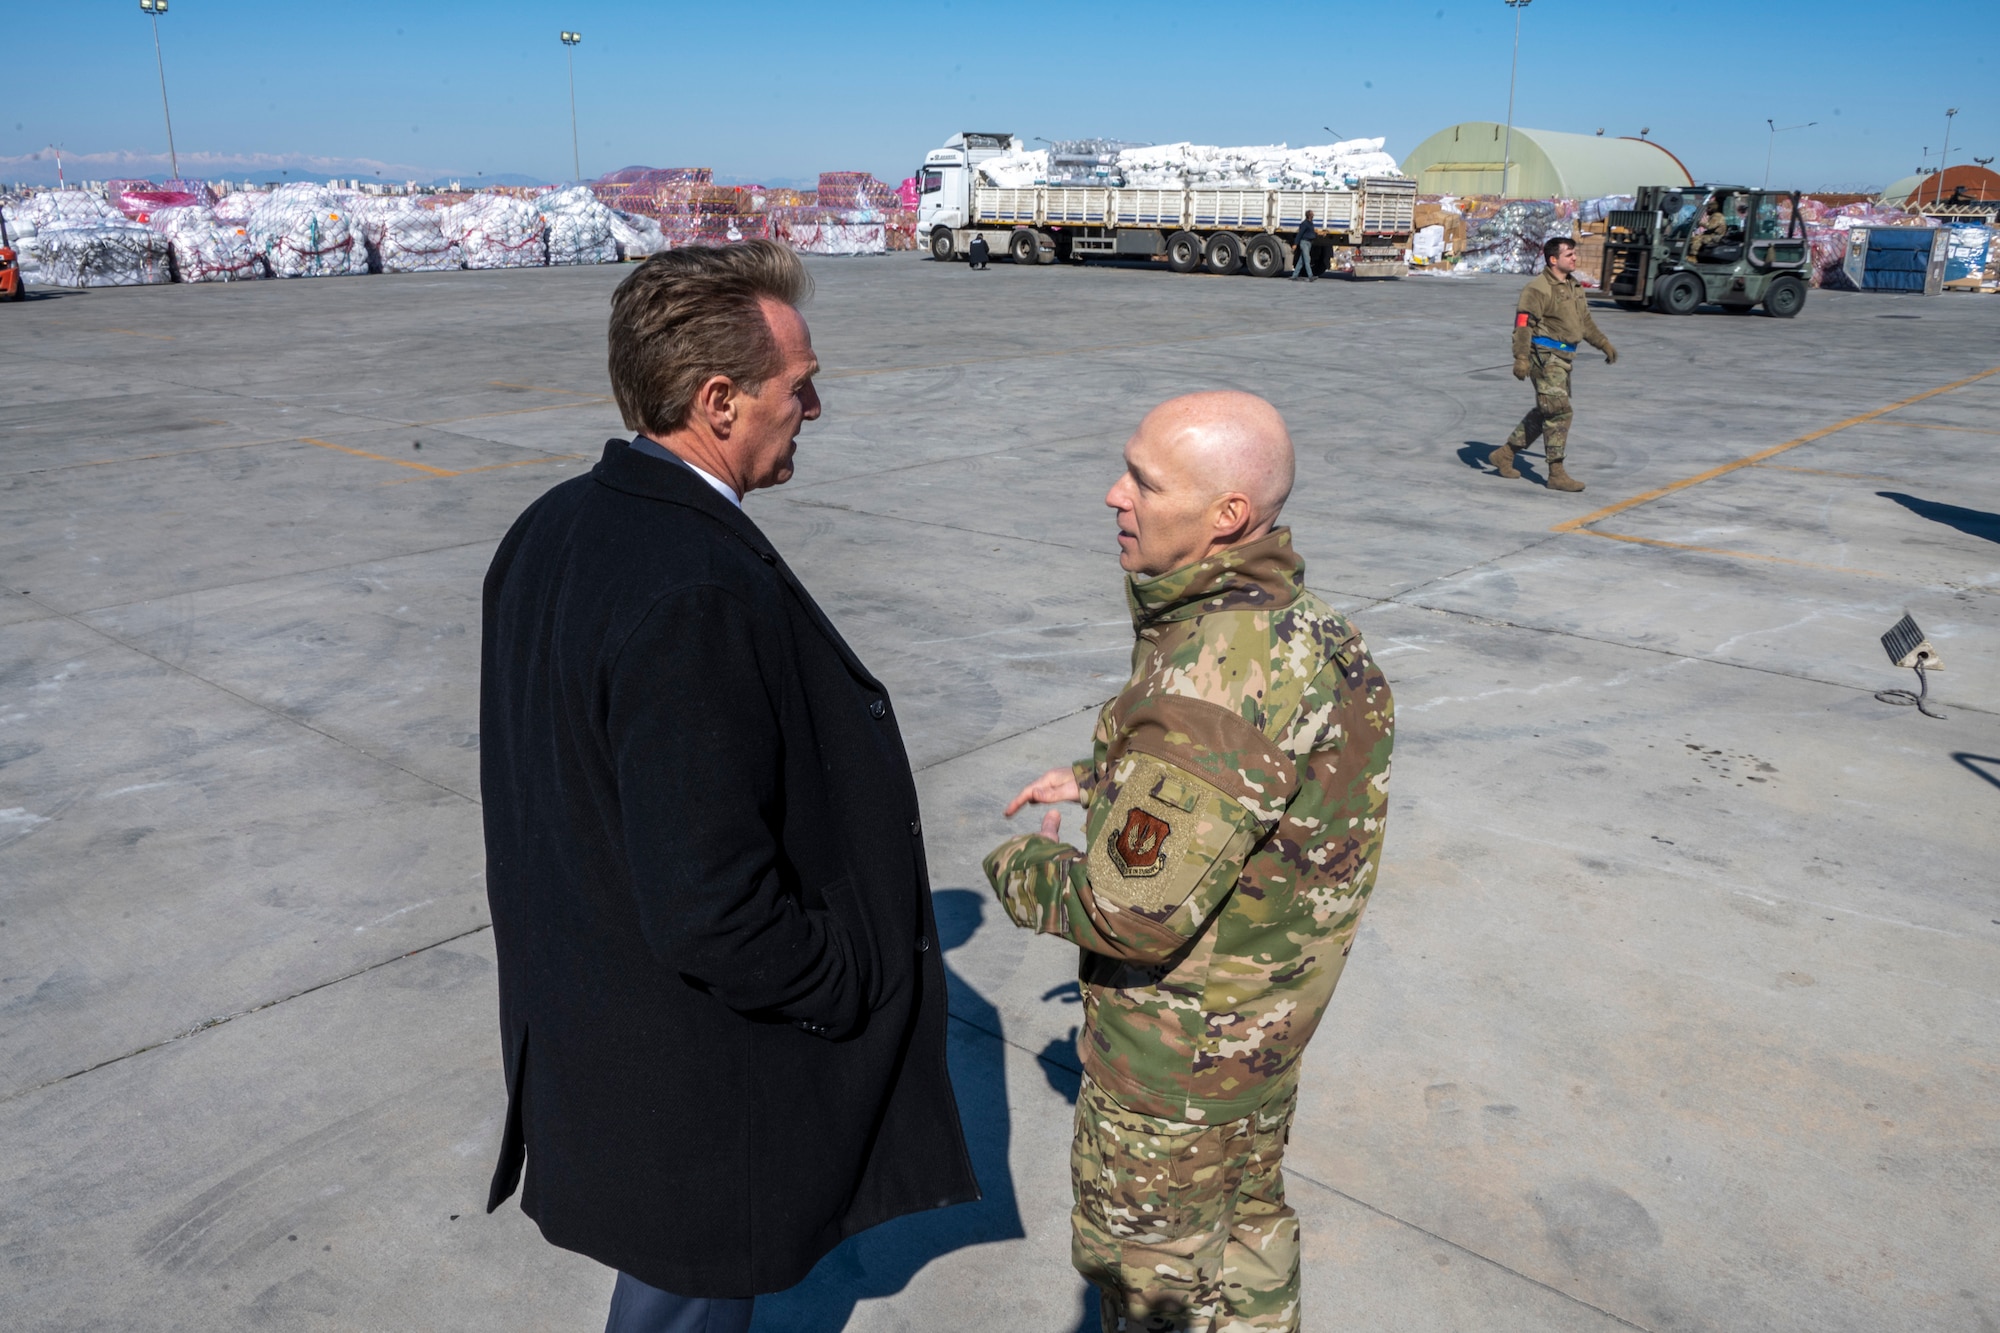 U.S. Ambassador Jeffry Flake, U.S. Ambassador to Türkiye, left, speaks with U.S. Air Force Col. Calvin B. Powell, 39th Air Base Wing commander, right, during his visit to Incirlik Air Base, Türkiye, Feb 13, 2023. Ambassador Flake visited Incirlik AB to discuss the recent earthquakes that struck central-southern Türkiye on Feb 6, 2023, and see the humanitarian support efforts first-hand. As Ambassador to Türkiye, Flake holds the highest civilian position as The Chief of Mission, and impacts the communication and resources of U.S. personnel, advancing the U.S. foreign policy goals. As a fellow NATO ally, the U.S. Government mobilized personnel to assist Türkiye in their response efforts. (U.S. Air Force photo by Senior Airman David D. McLoney)